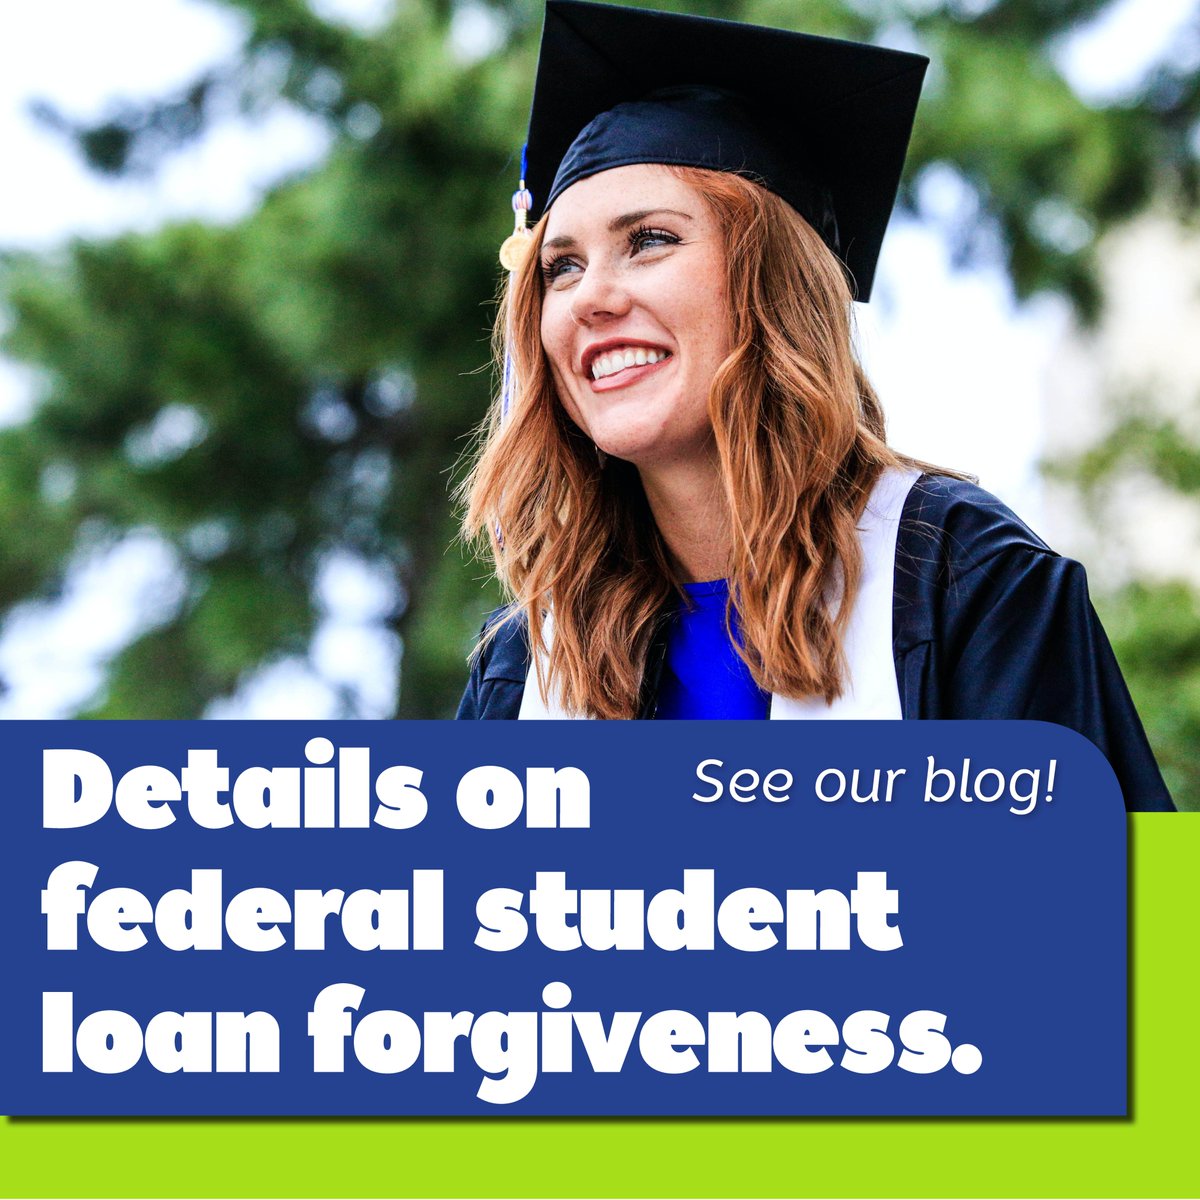 Have you heard about student loan forgiveness? If you have federal student loans and haven't looked into this yet, we have a great blog article that breaks down the main details about the federal student loan forgiveness program. See our blog: membersalliance.org/education/fina…